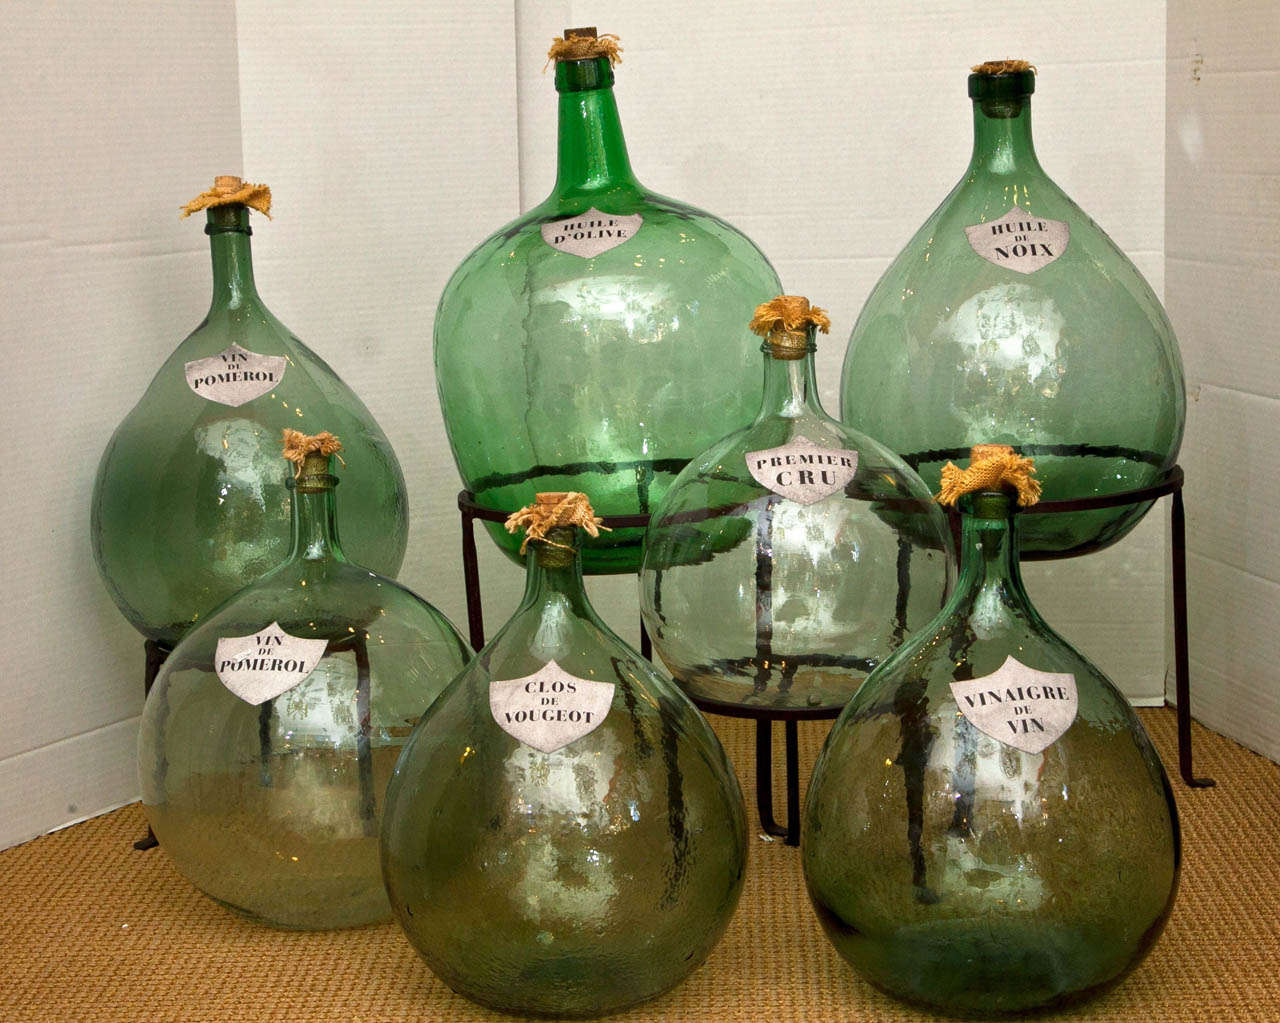 A collection of 7 hand blown and labeled French wine storage jars. Various sizes and shapes, all with cork and burlap stops.
The wrought iron stands are included.